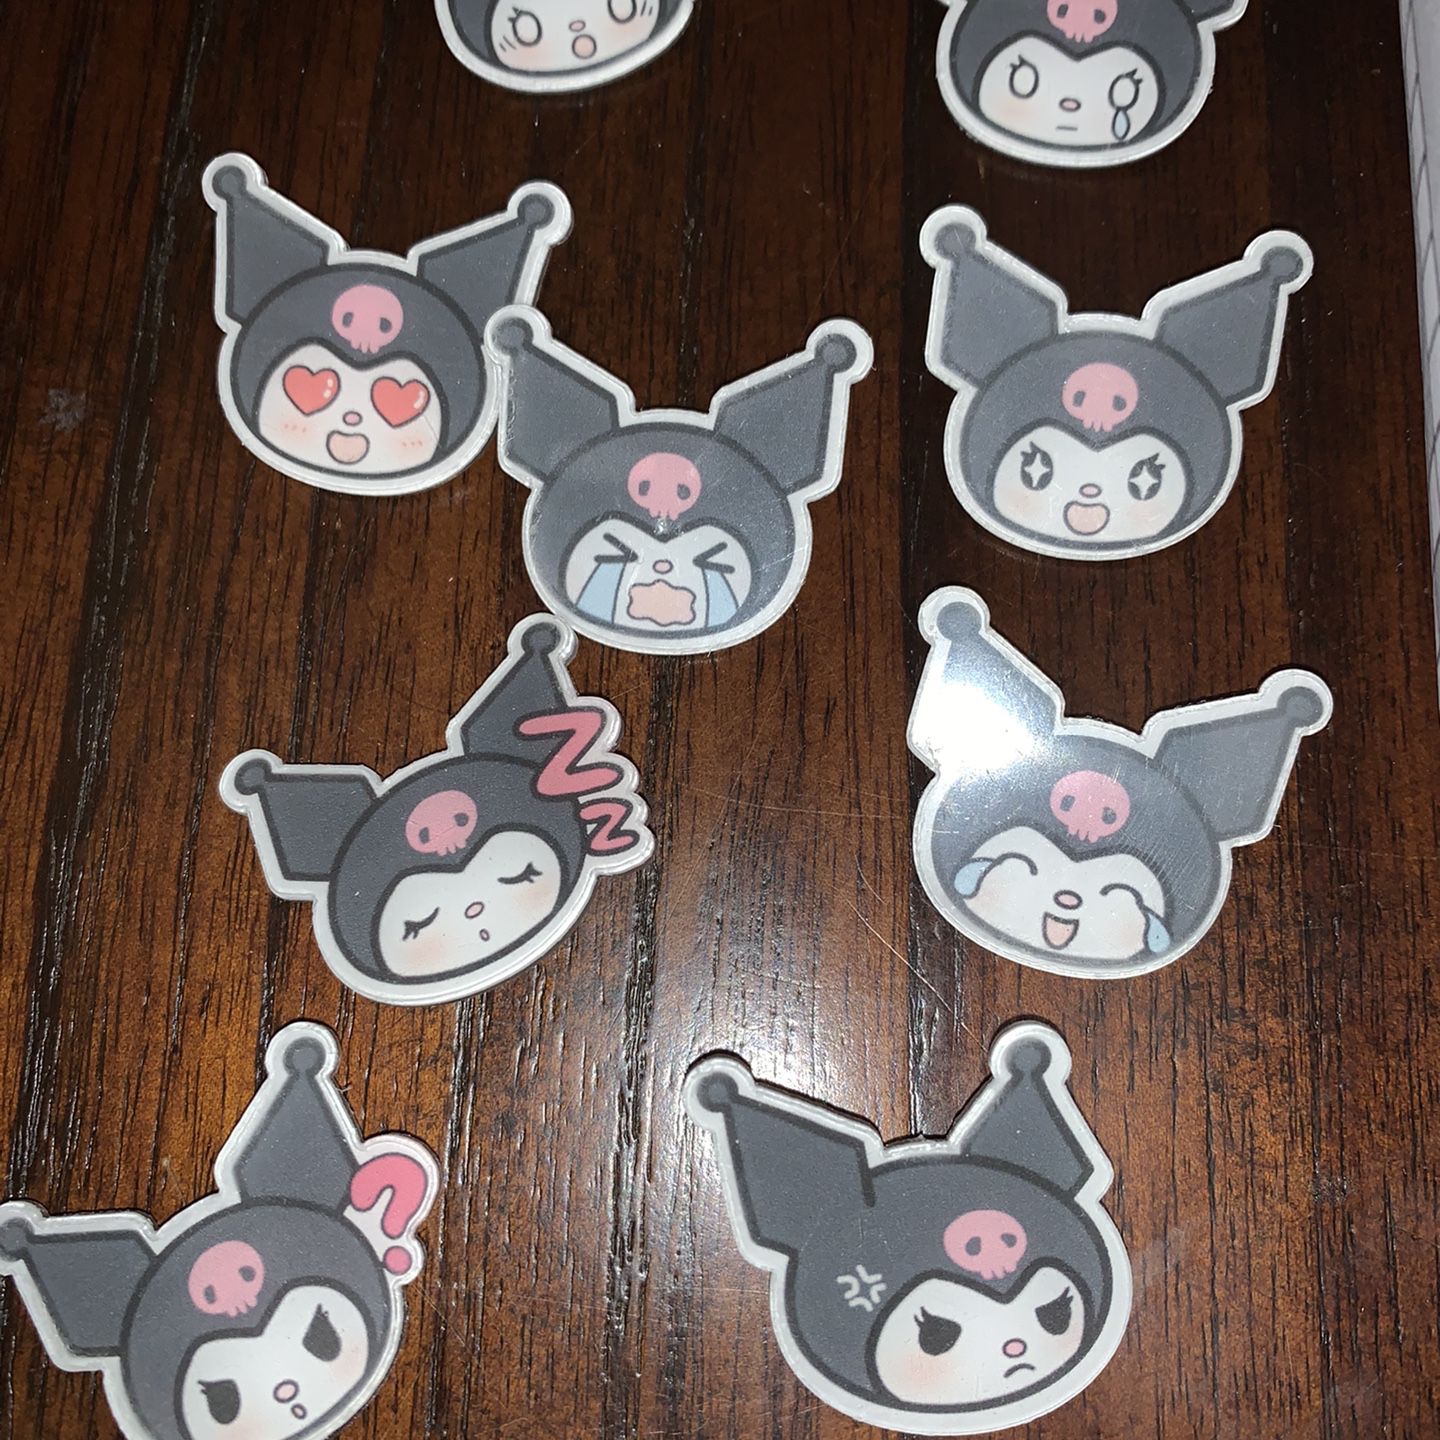 Sanrio Pins for Sale in Bakersfield, CA - OfferUp